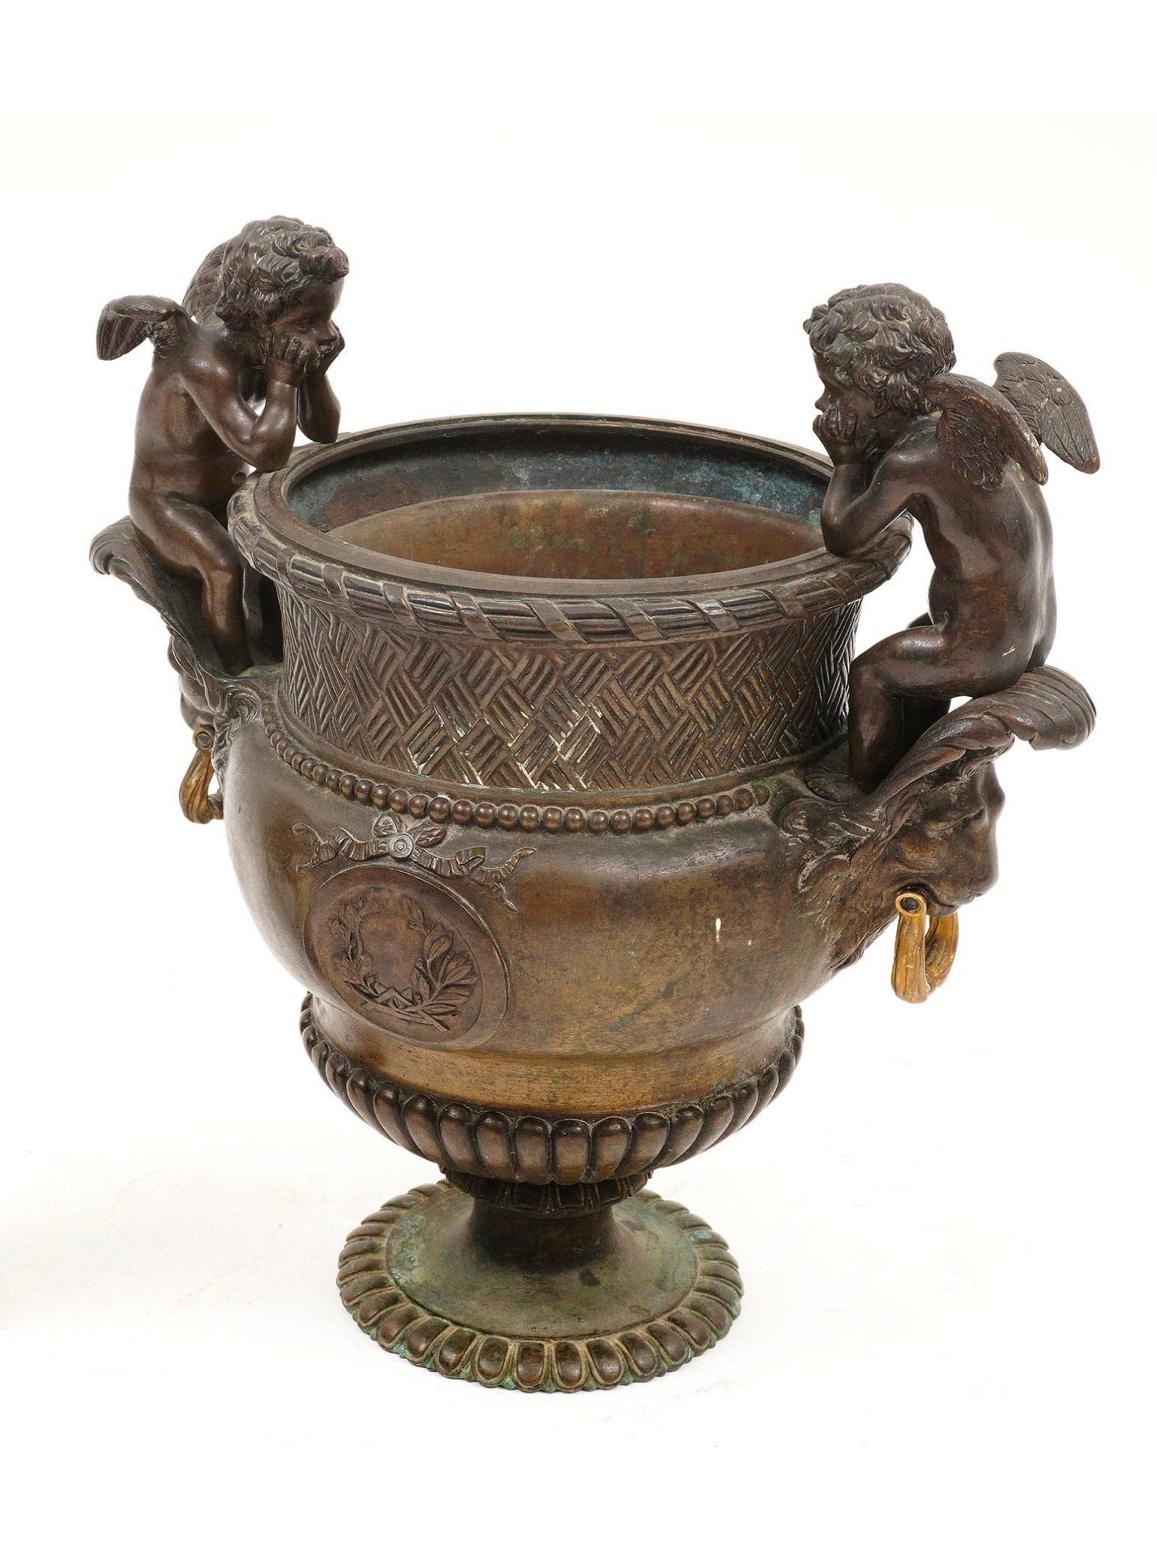 Beautiful patinated Belle Epoque cast bronze urn featuring two seated cherubs over lion mask handles, foliate medallions and garland. The urn is believed to be designed by artist Pierre Duval Le Camus. It is in great condition and has excellent